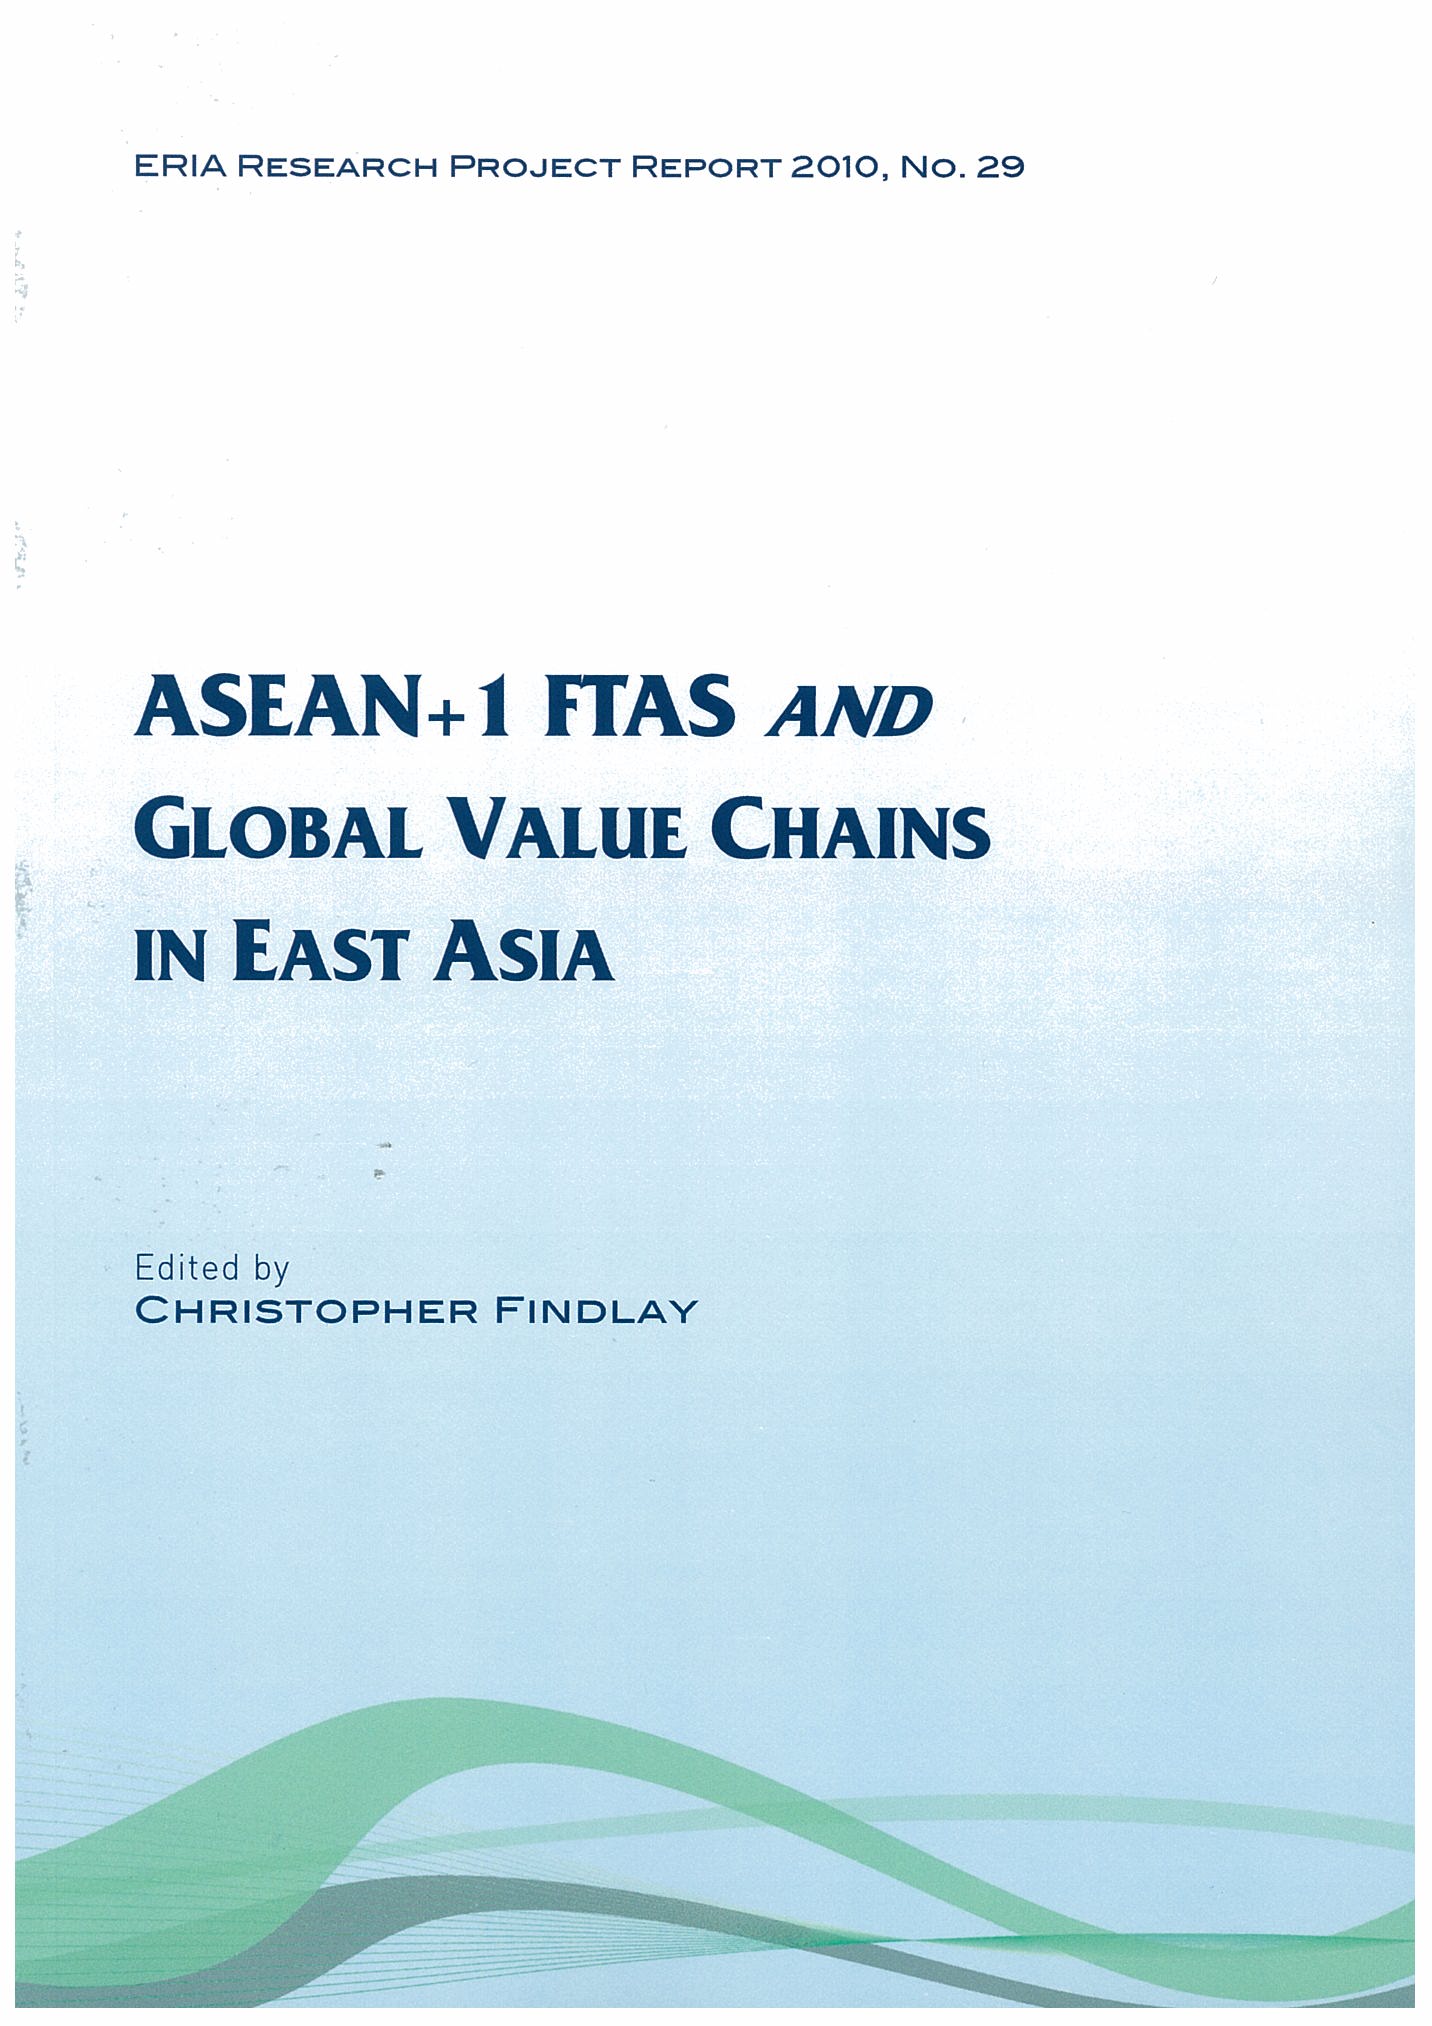 ASEAN +1 FTAS and Global Value Chains in East Asia